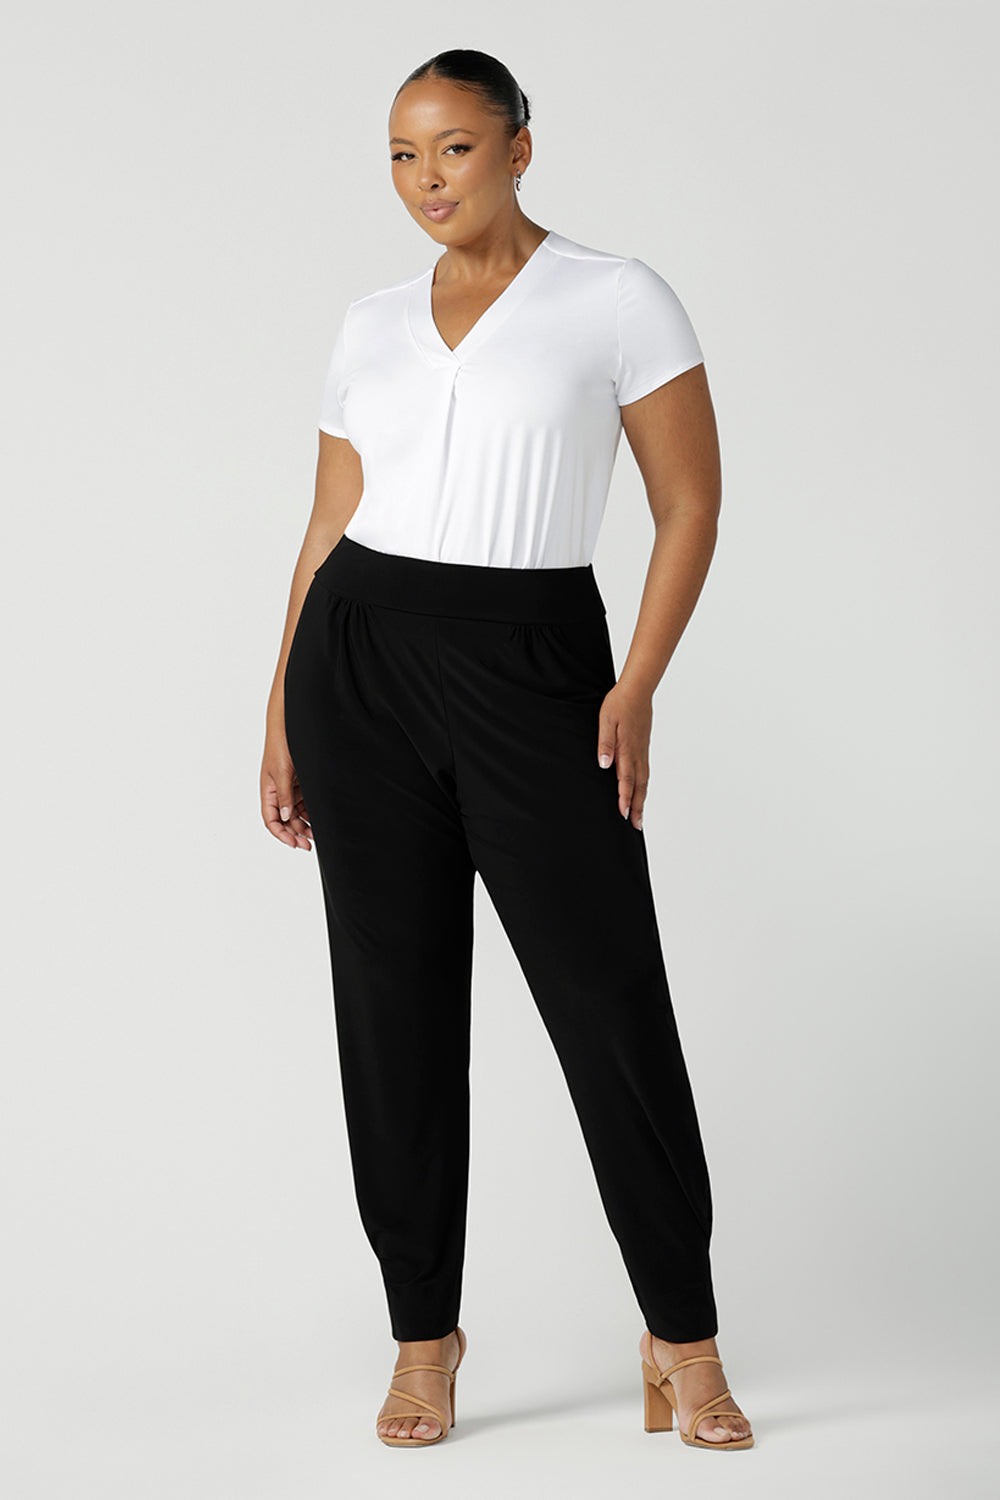 A size 18 curvy woman wears great pants for travel, these dropped crotch, single seam black pants are made stretchy jersey for ultimate comfort. Worn with a white bamboo jersey top , shop these comfy black pants for your travel and capsule wardrobe now!